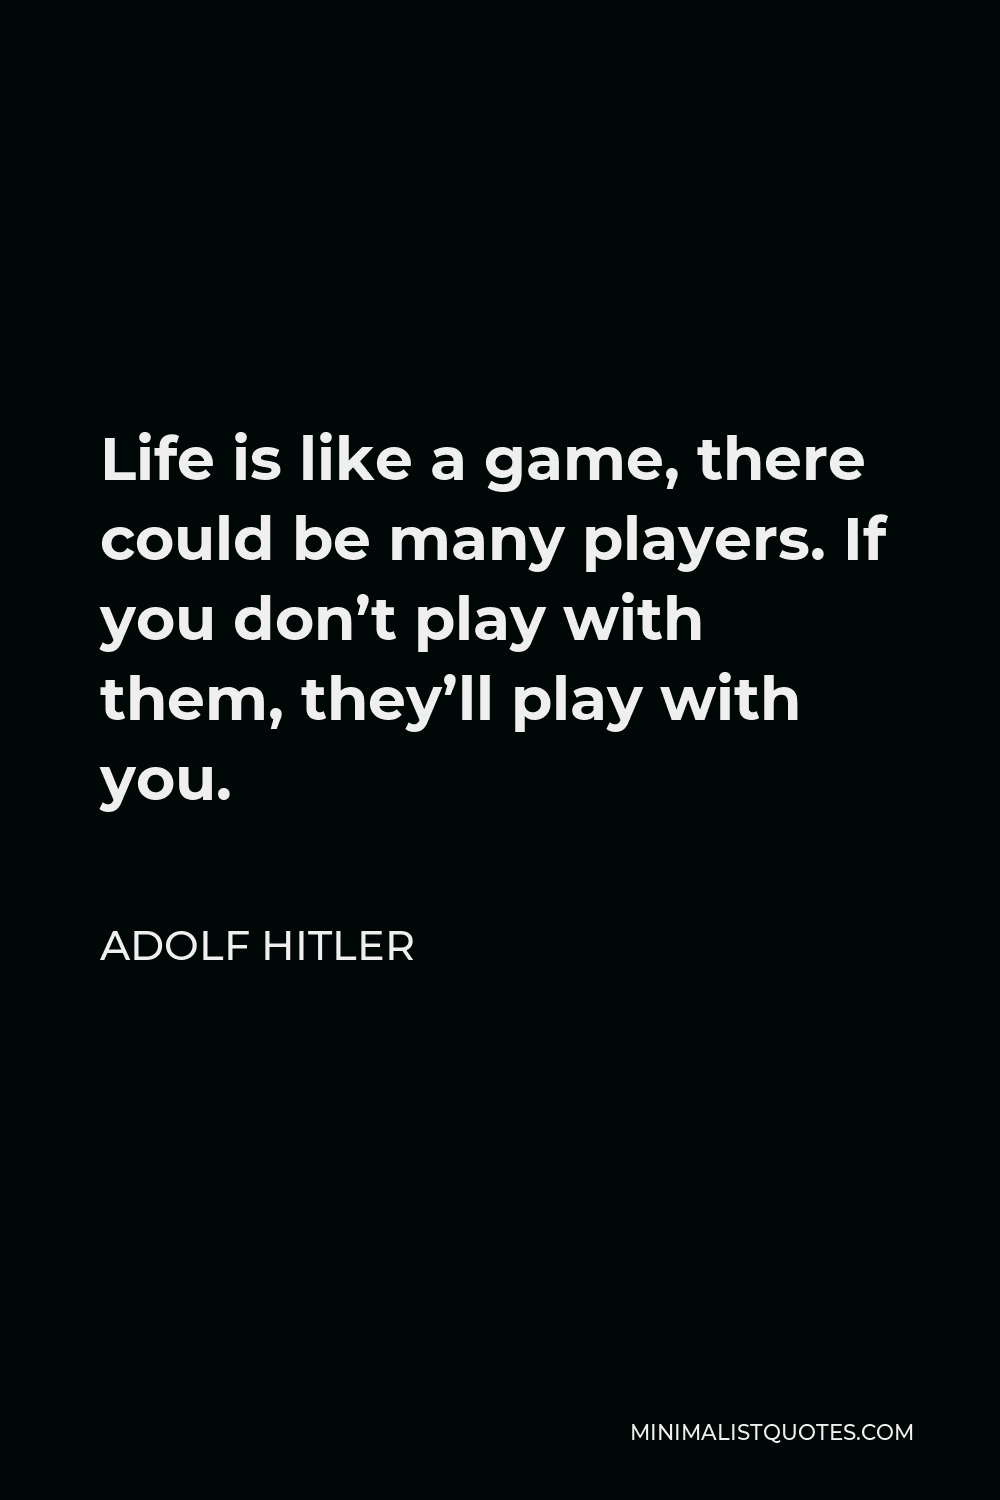 Adolf Hitler Quote Life Is Like A Game There Could Be Many Players If You Don T Play With Them They Ll Play With You